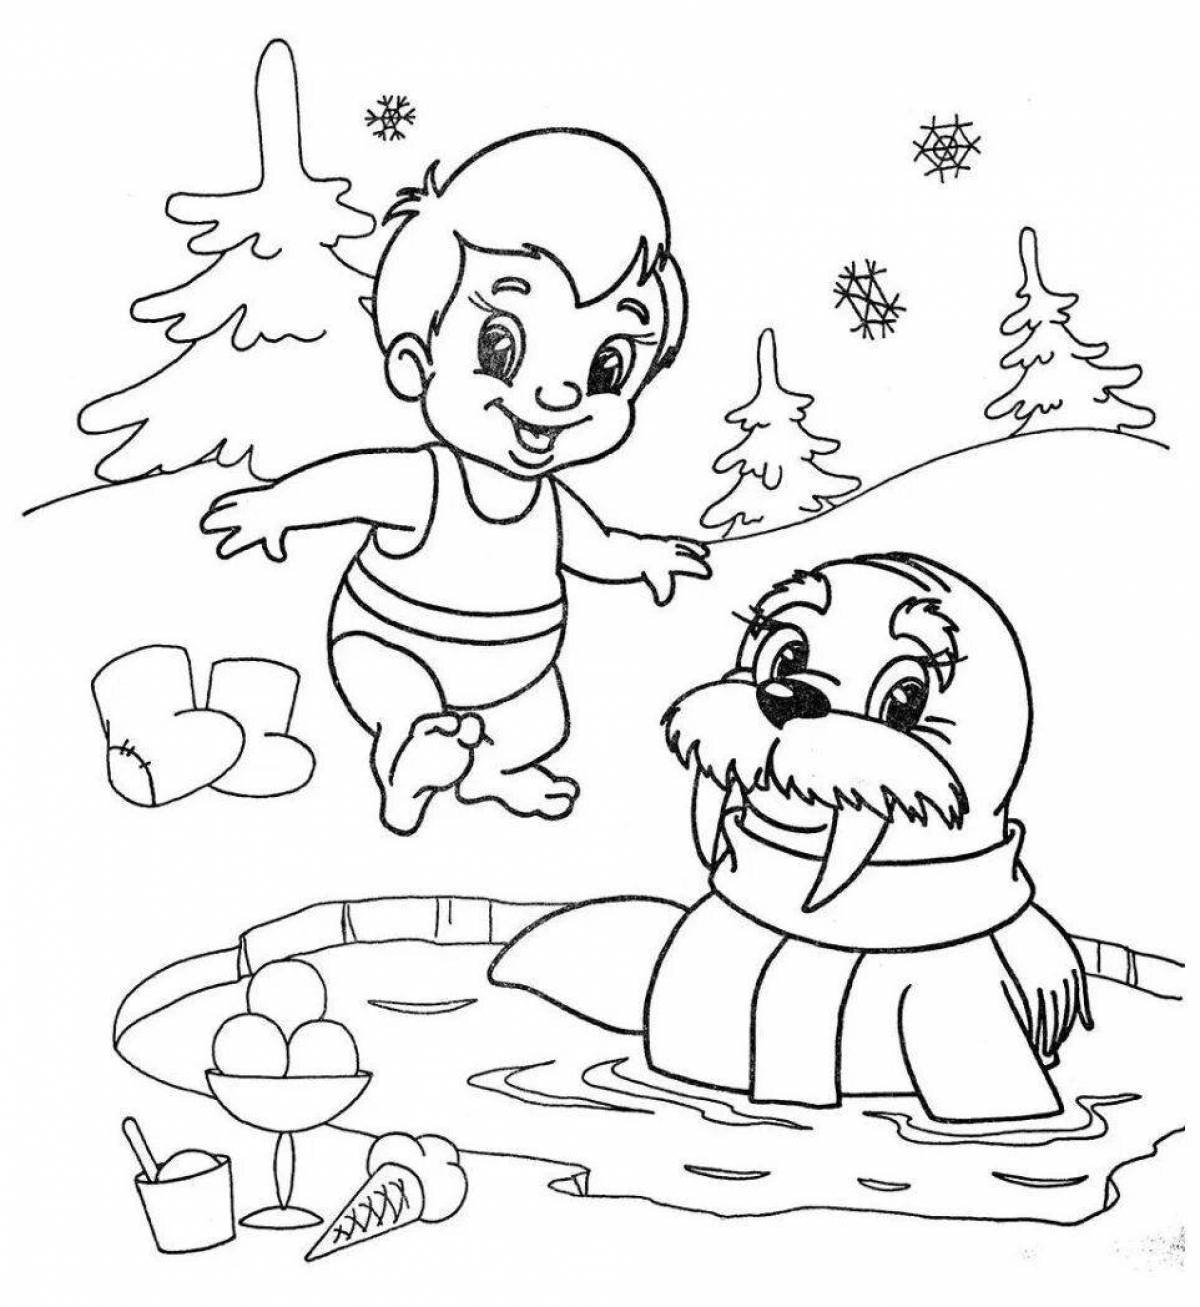 Fun temper coloring page for kids